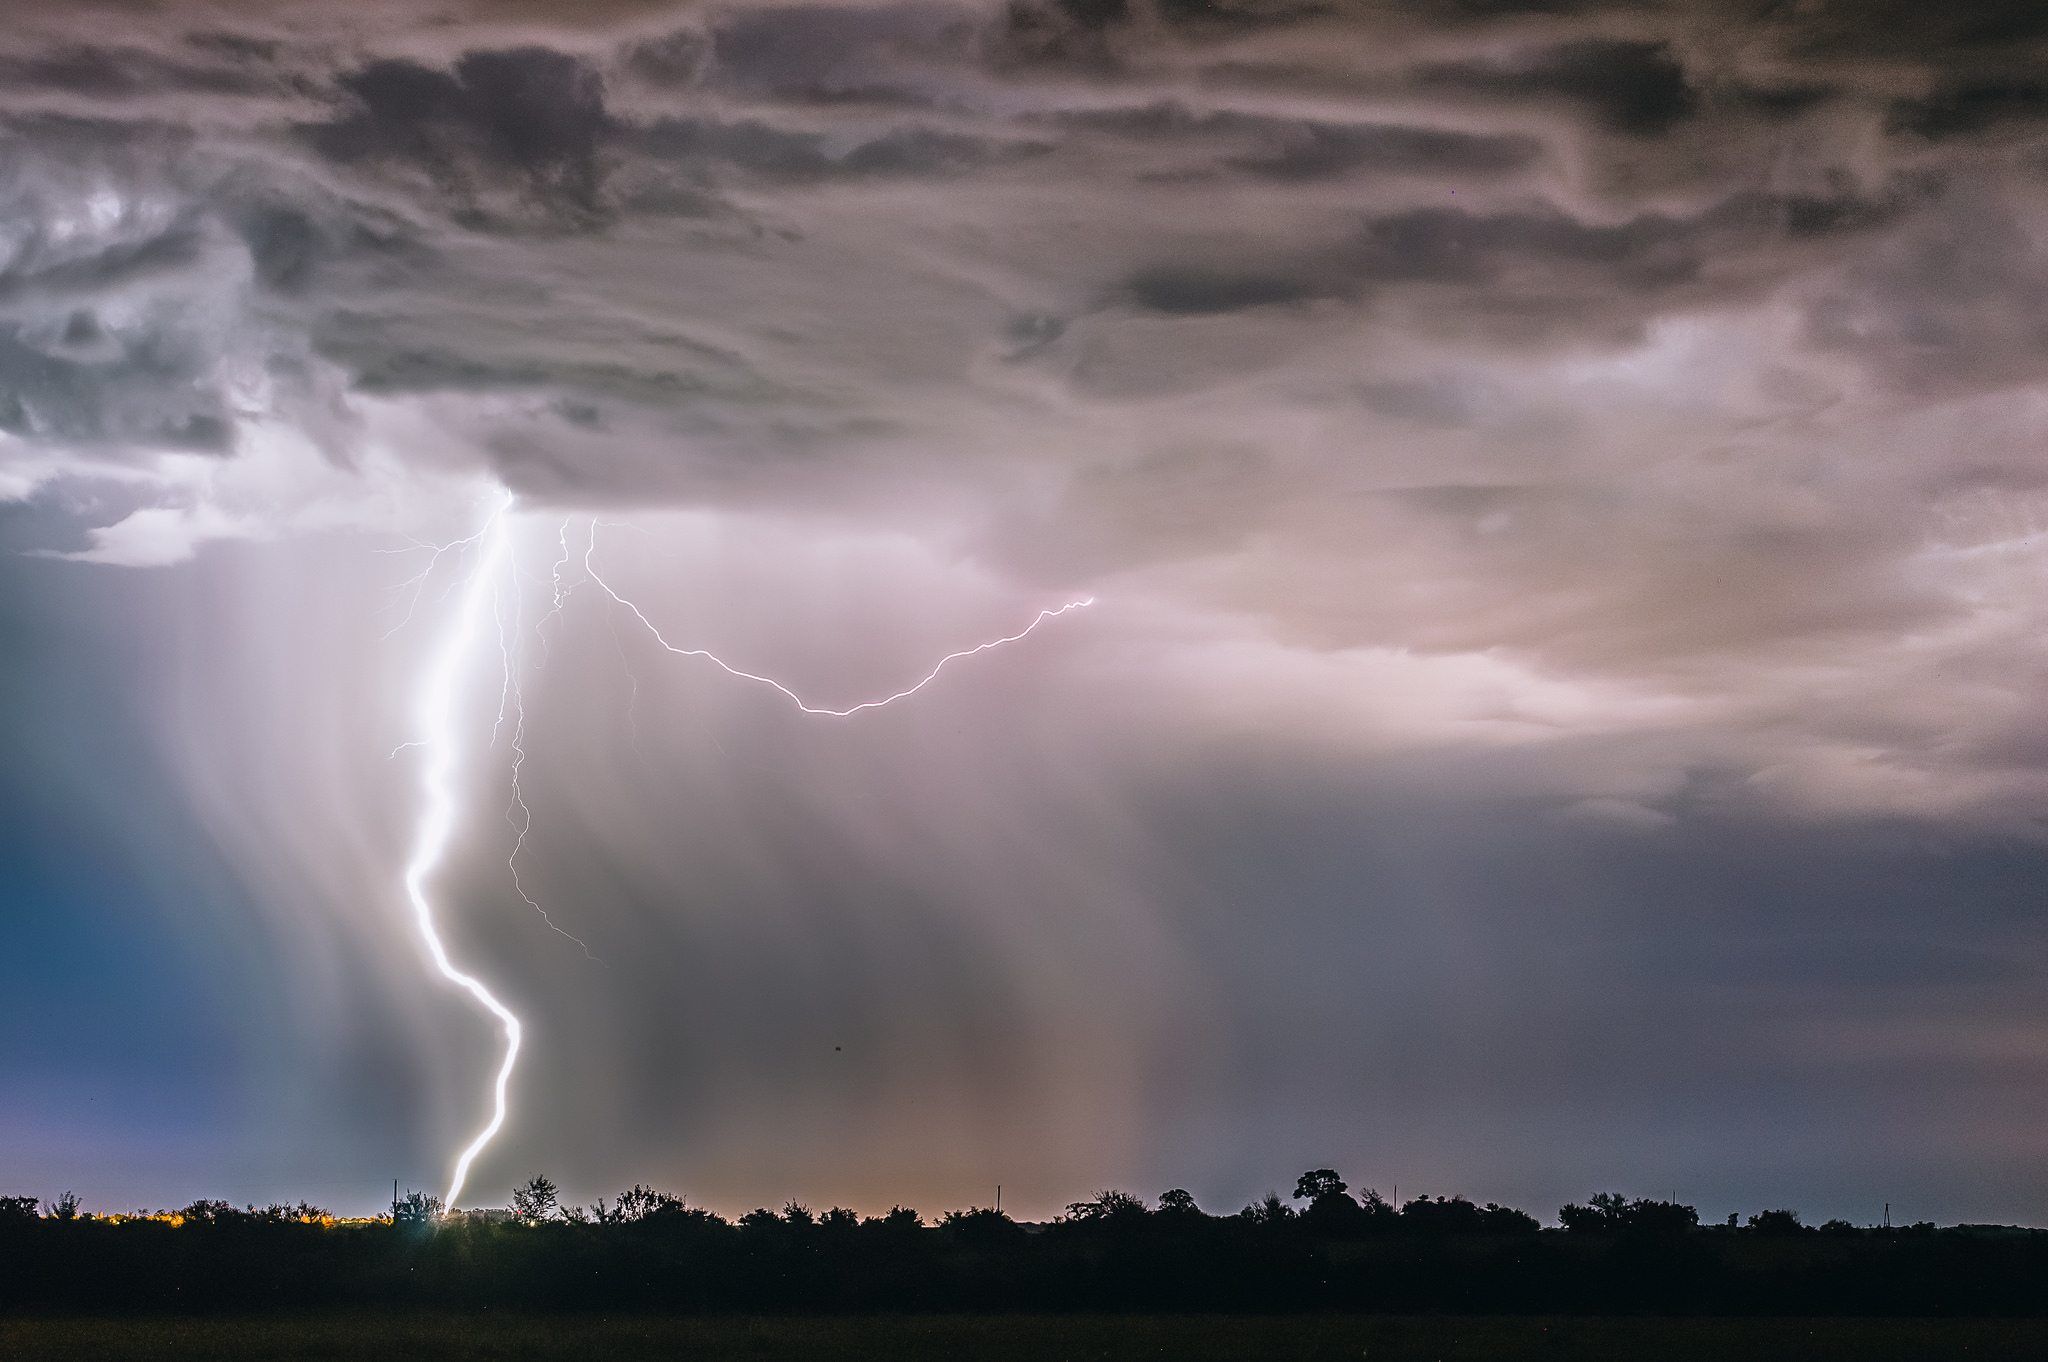 17 Photos That Prove You Can Capture Amazing Shots in Bad Weather | Photzy